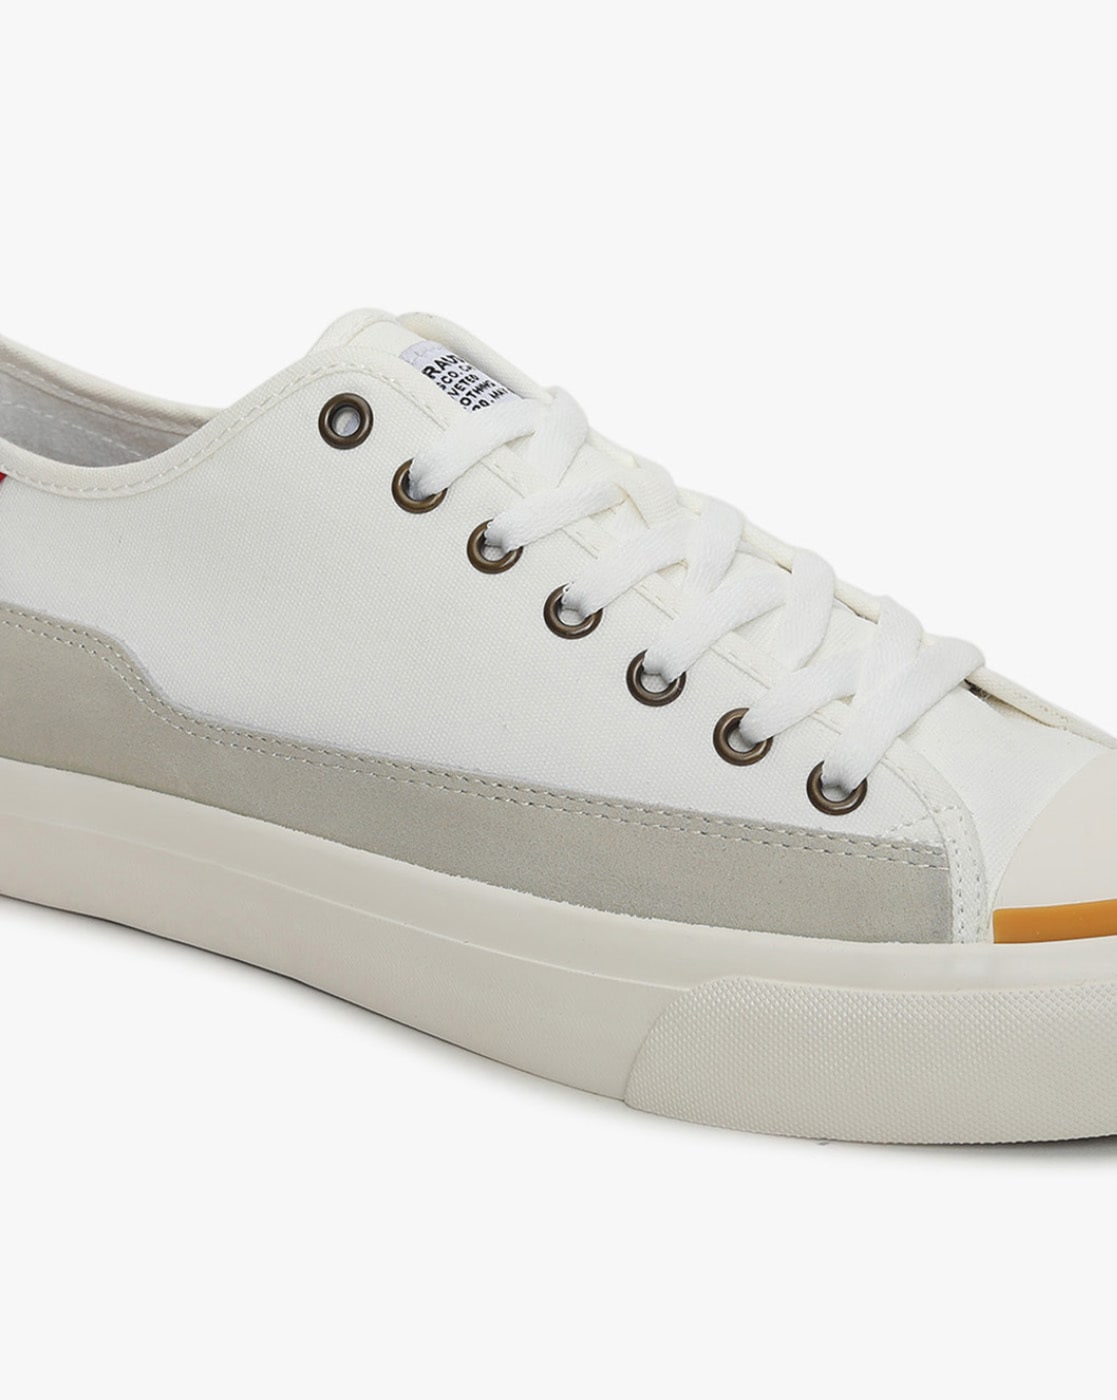 Courage Mens Low Cut White Leather Sneaker